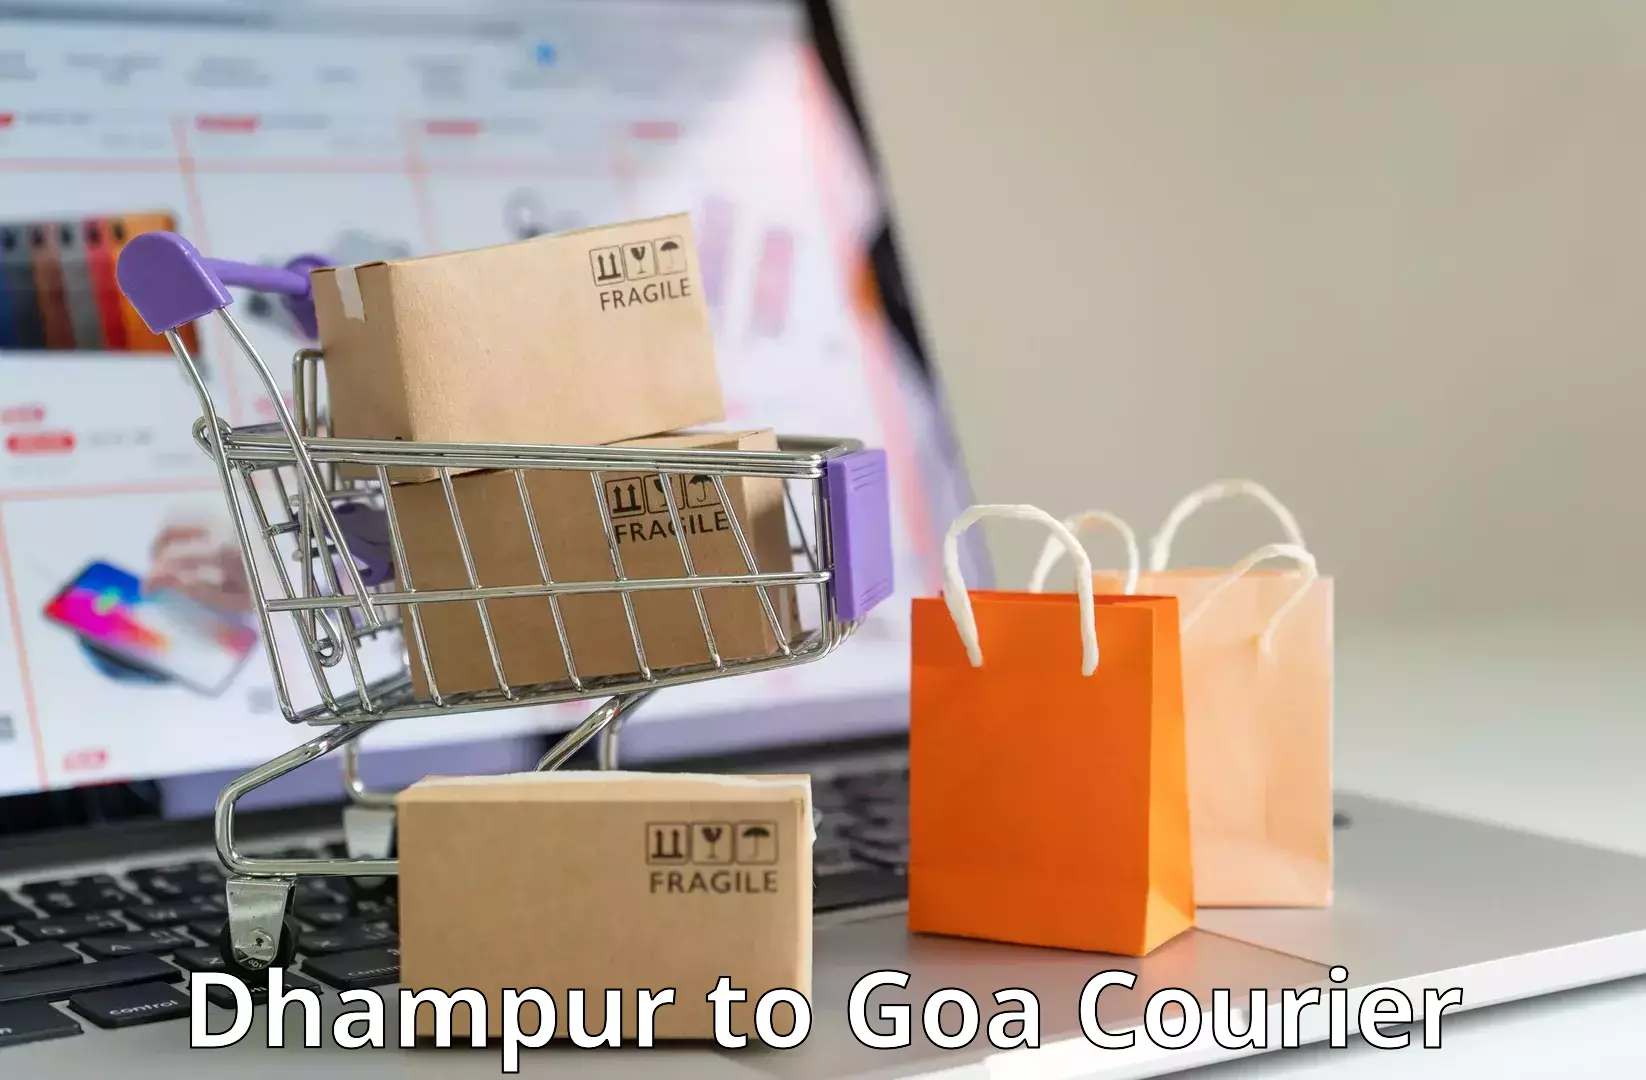 Modern courier technology Dhampur to IIT Goa